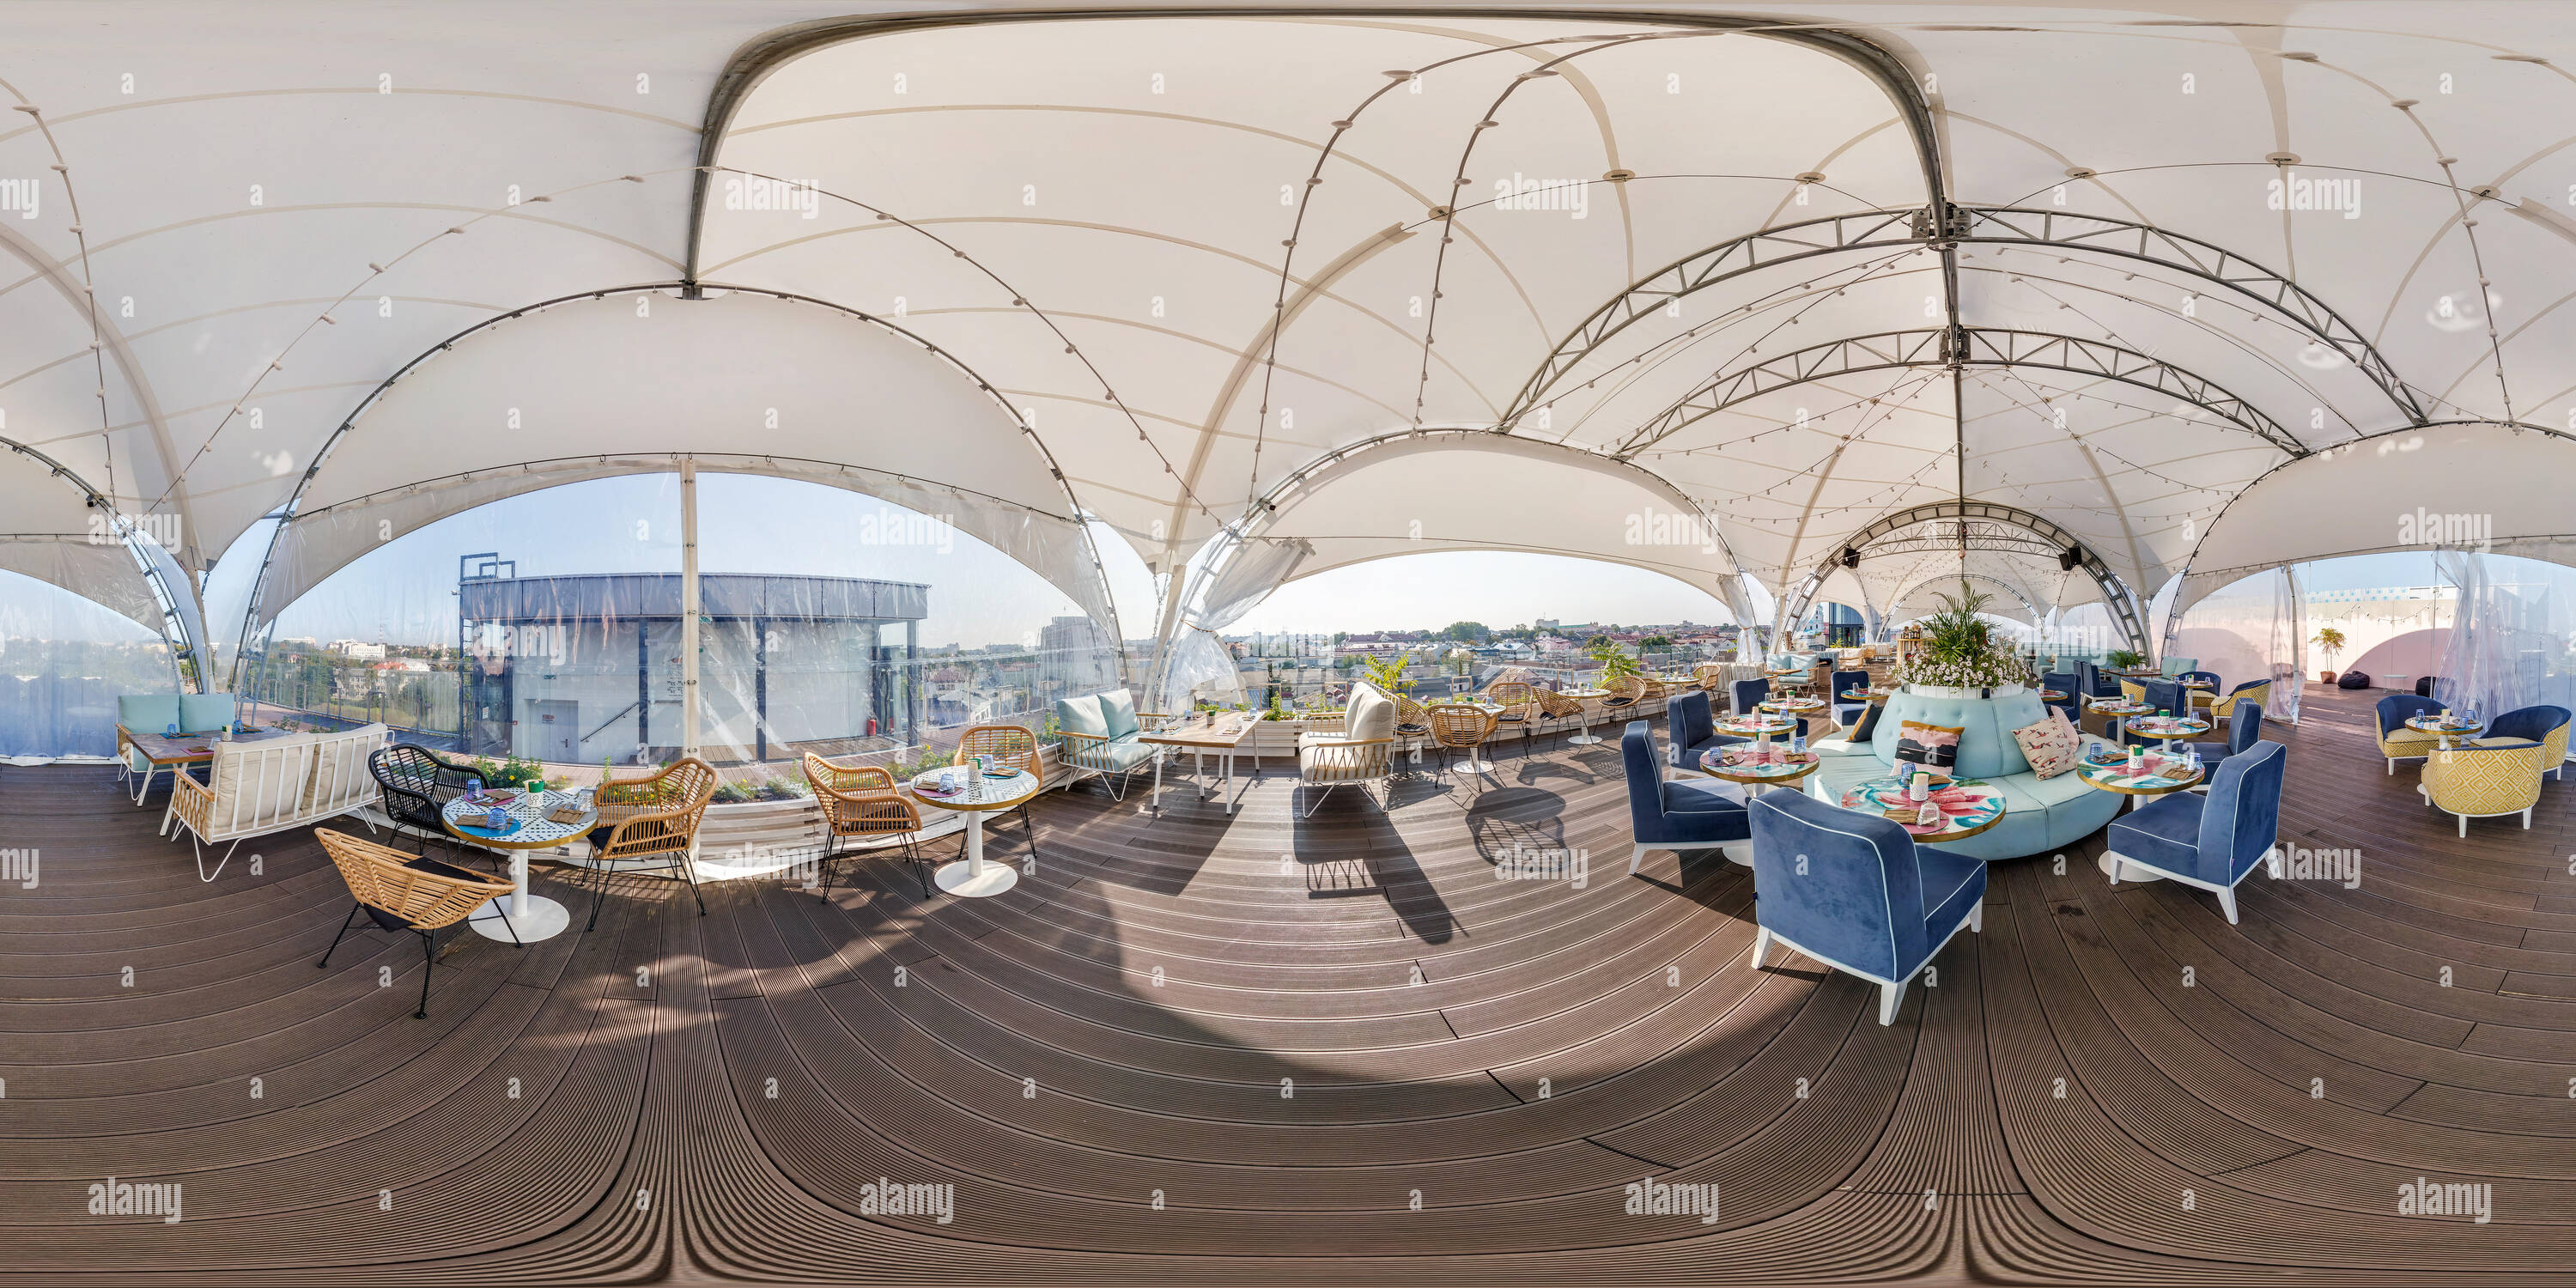 360 degree panoramic view of GRODNO, BELARUS - AUGUST, 2018: full seamless spherical hdri panorama 360 degrees angle view in modern cafe under a canopy on the roof of the building